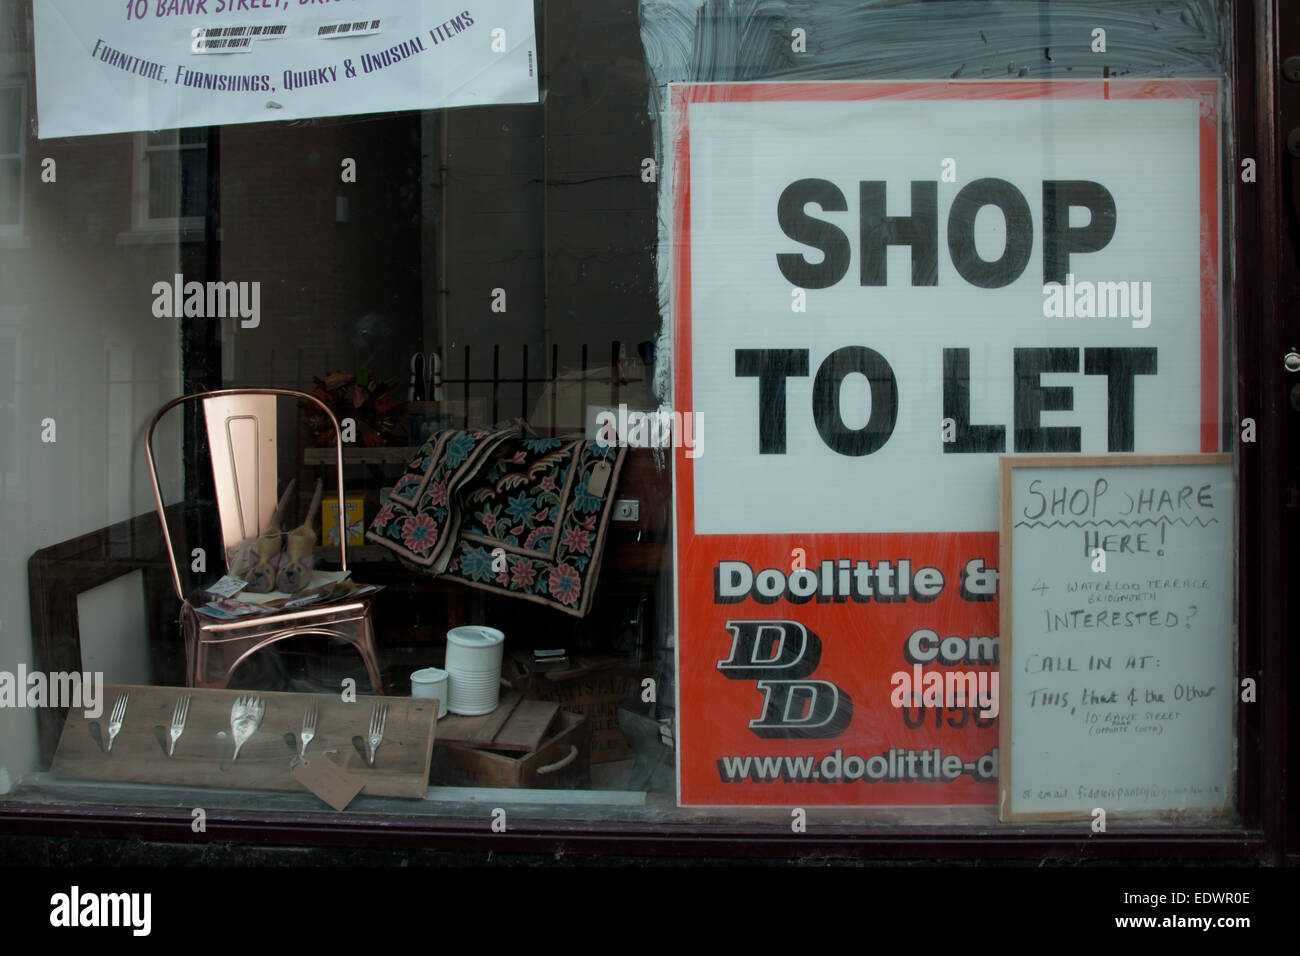 'Shop to let' sign in an empty or vacant shop window, Bridgnorth, Shropshire UK Stock Photo